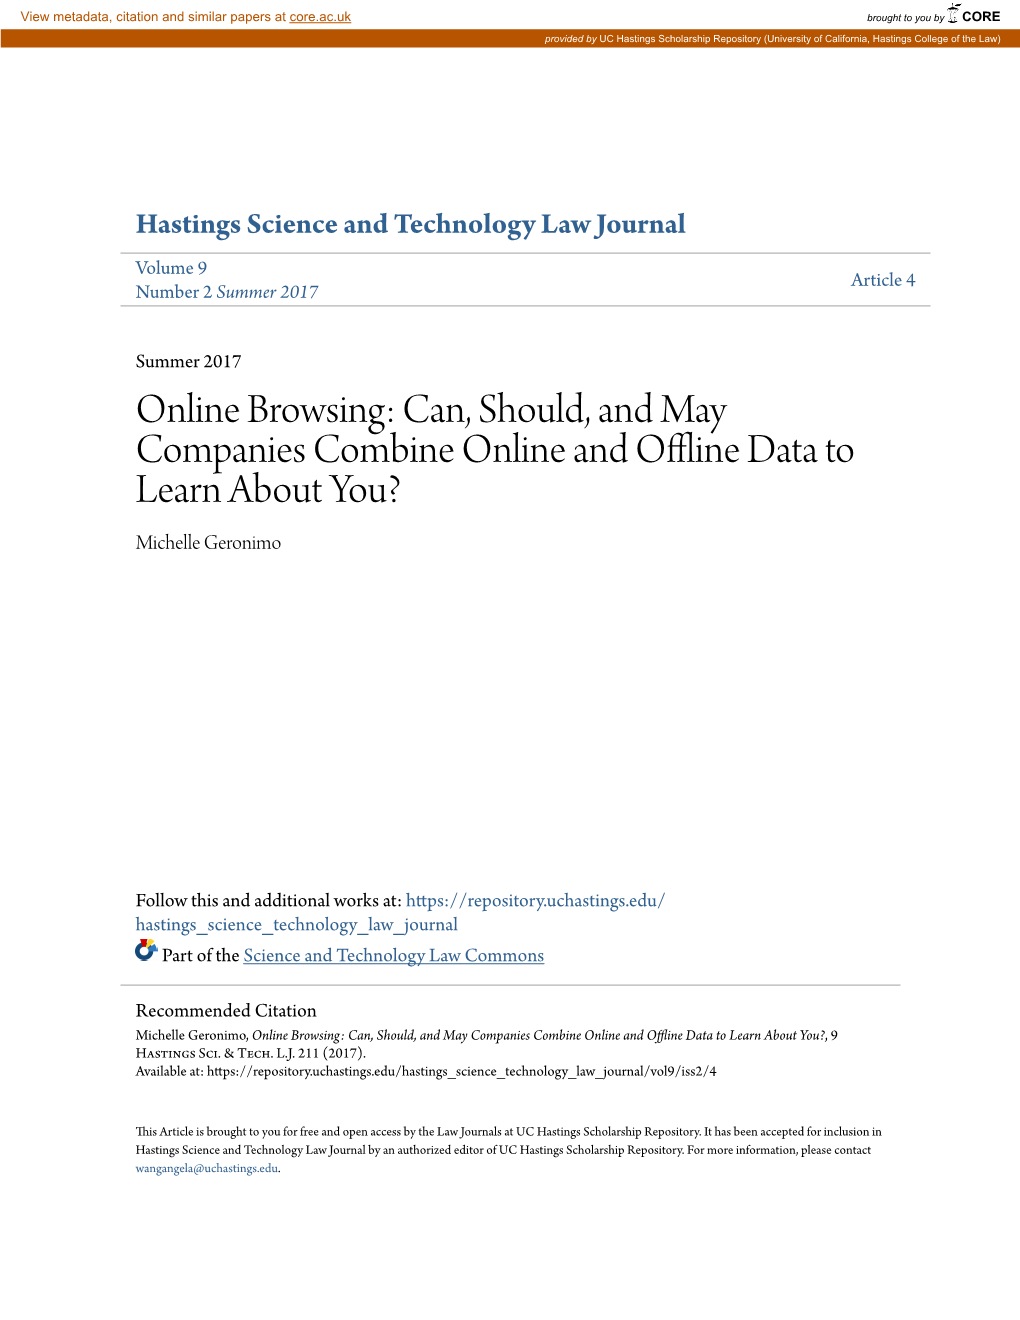 Can, Should, and May Companies Combine Online and Offline Data to Learn About You?, 9 Hastings Sci